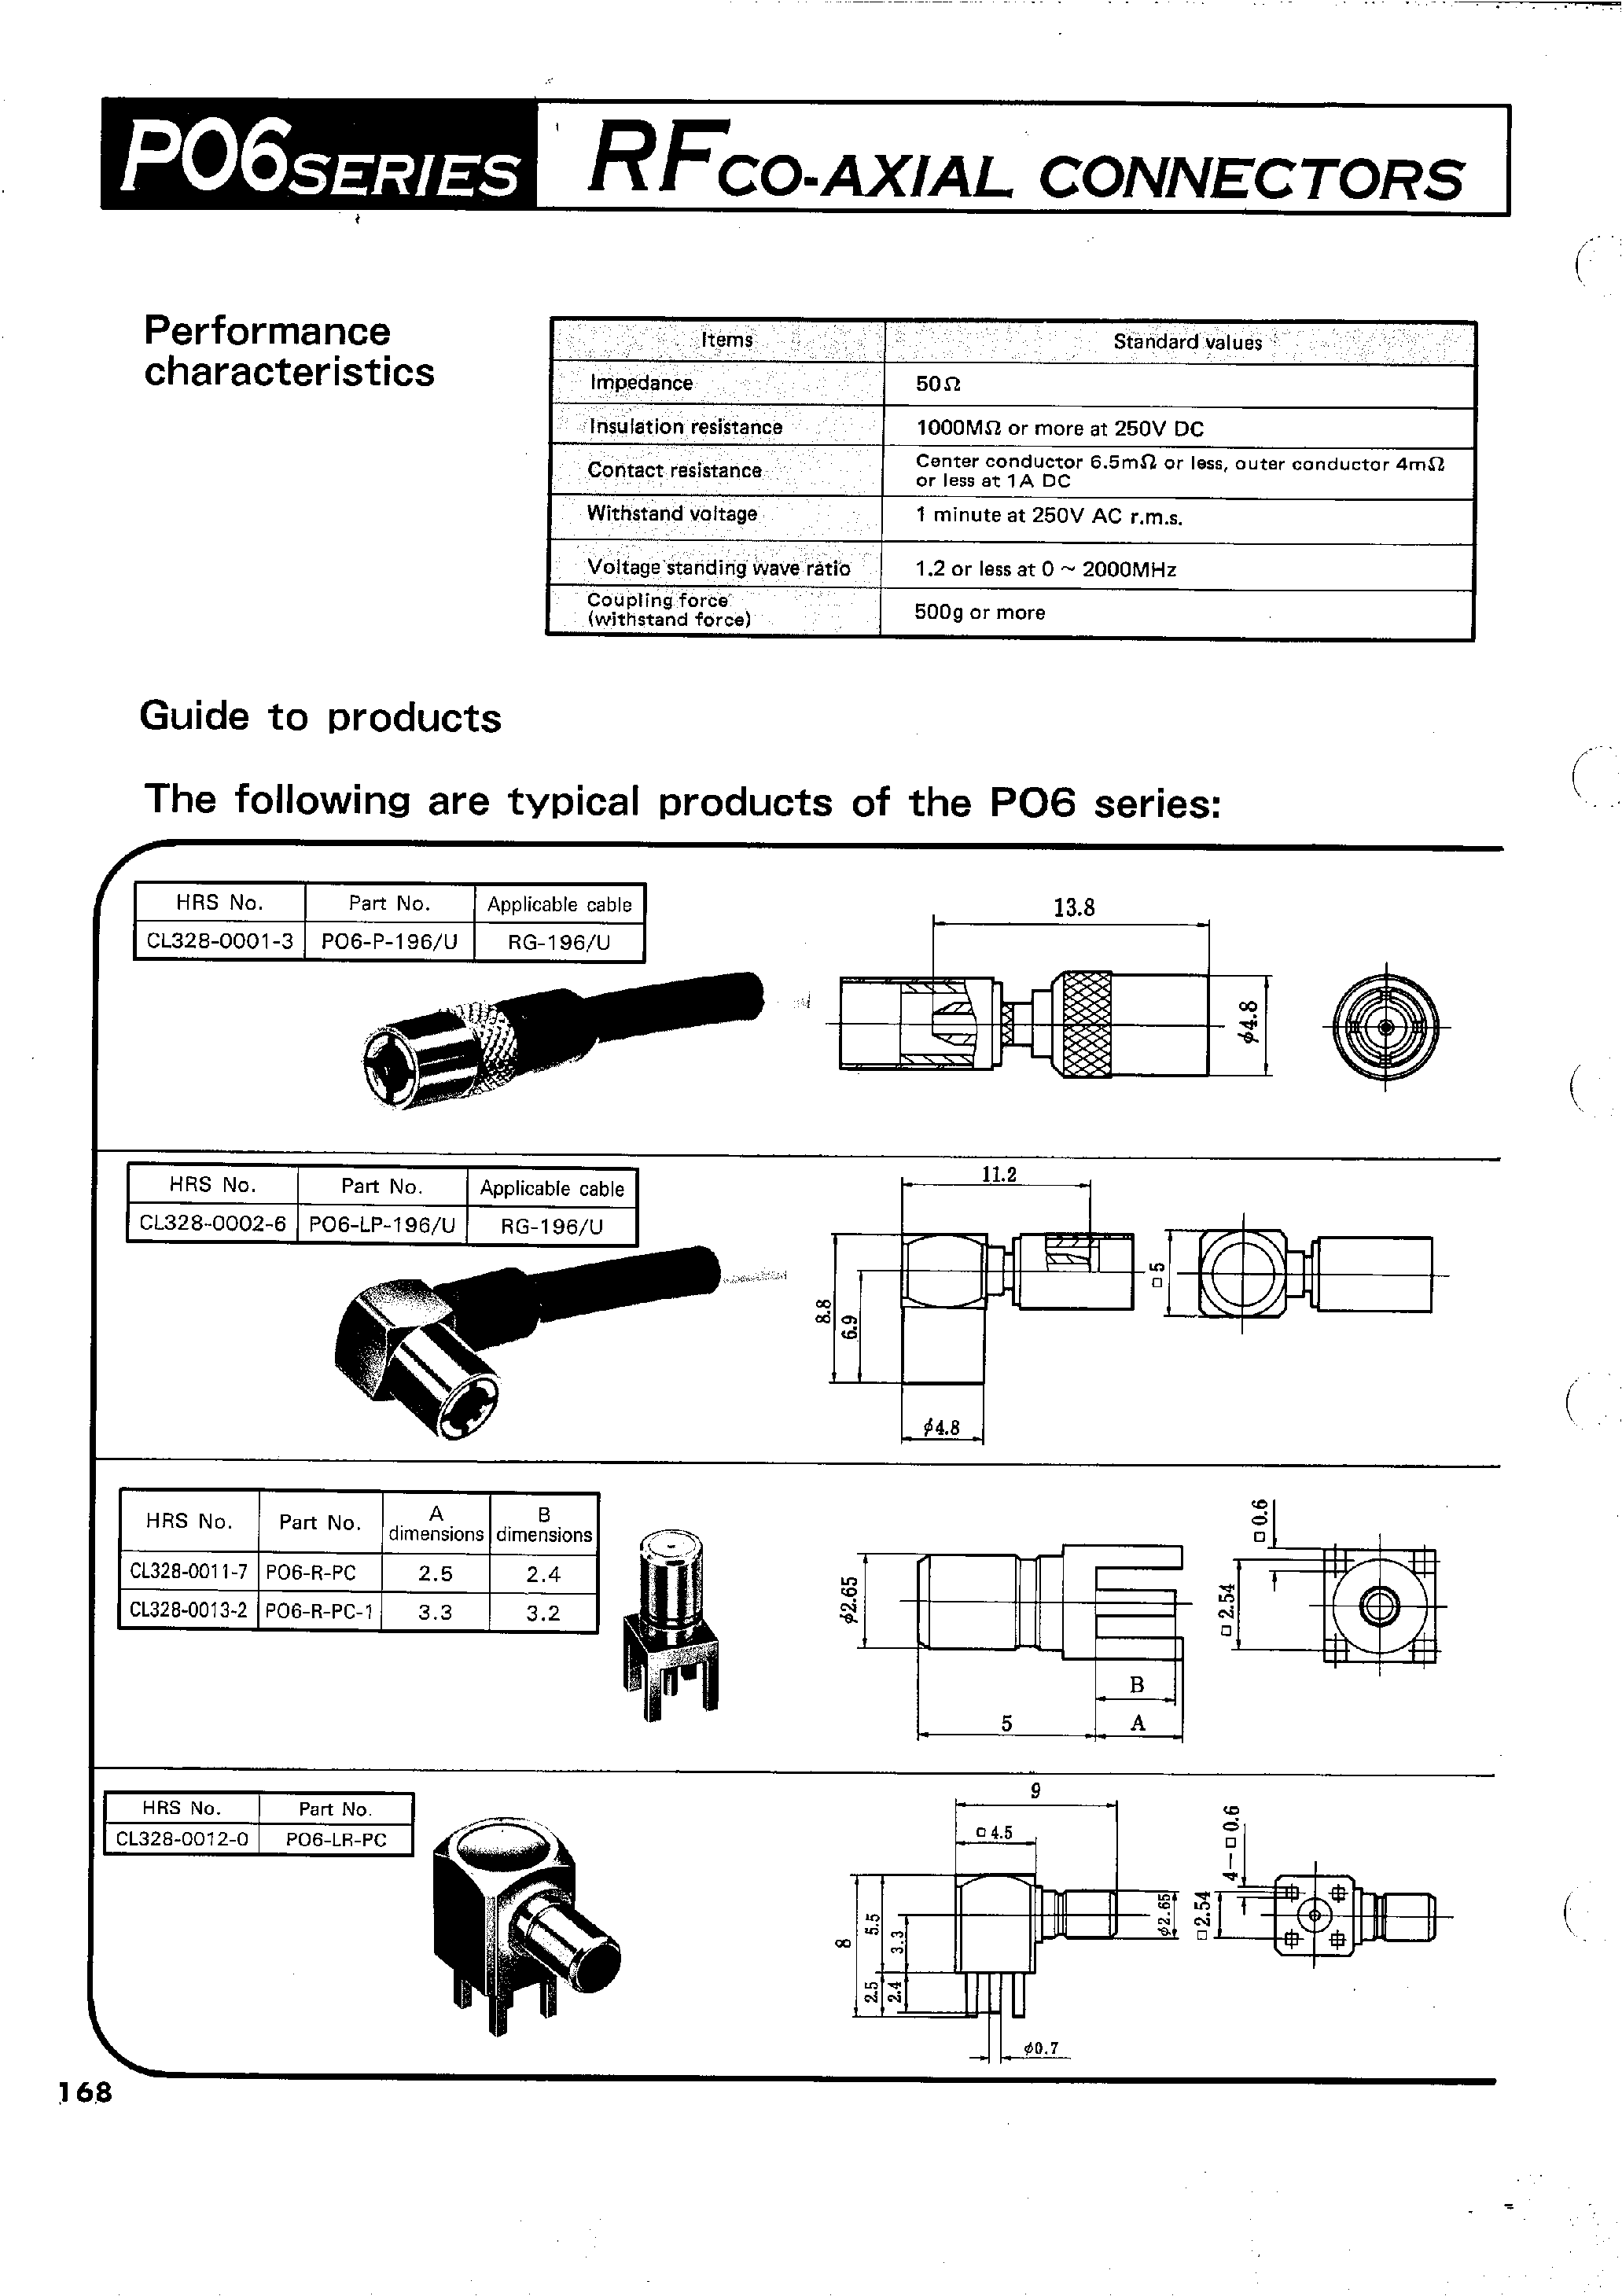 Datasheet PO6-R-PC - RFCO-AXIAL CONNECTORS(Low-profile ultrasmall coaxial connector) page 2